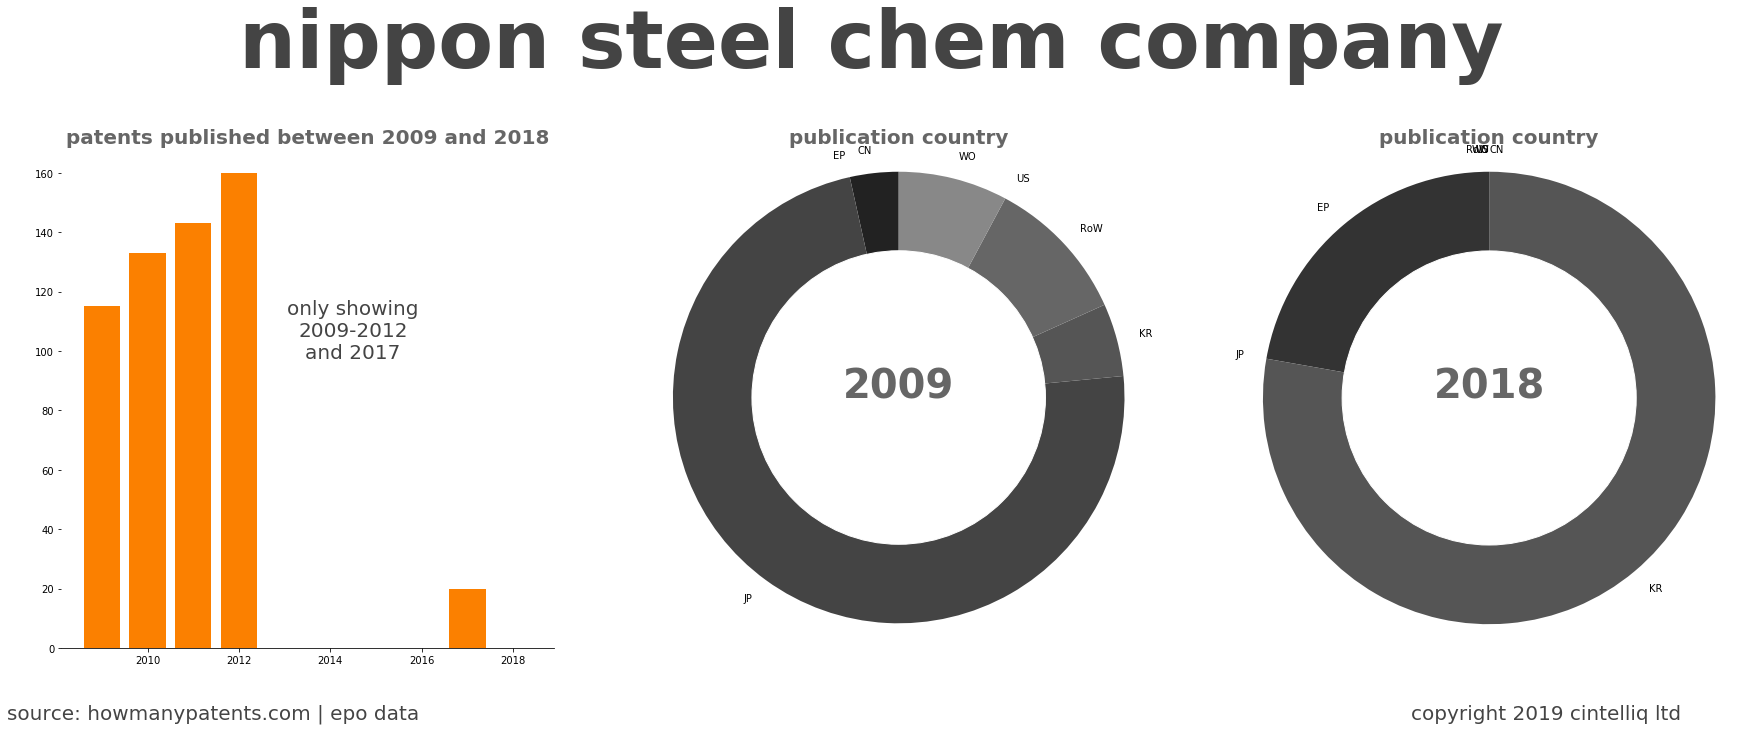 summary of patents for Nippon Steel Chem Company